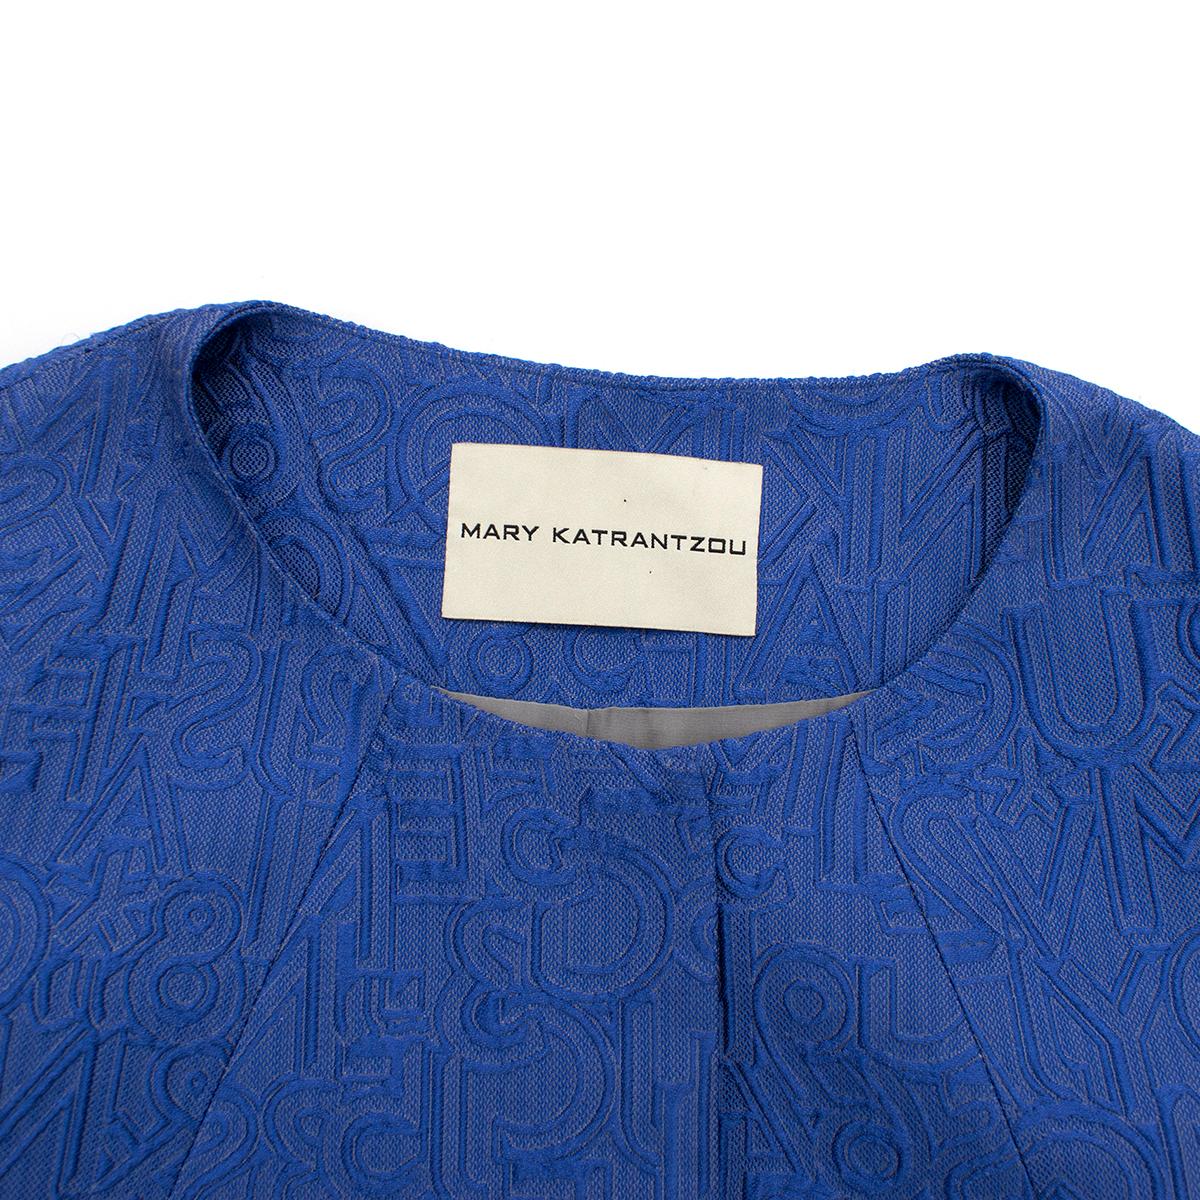 Mary Katrantzou Blue Brocade Twill Coat estimated size S-M In Good Condition For Sale In London, GB